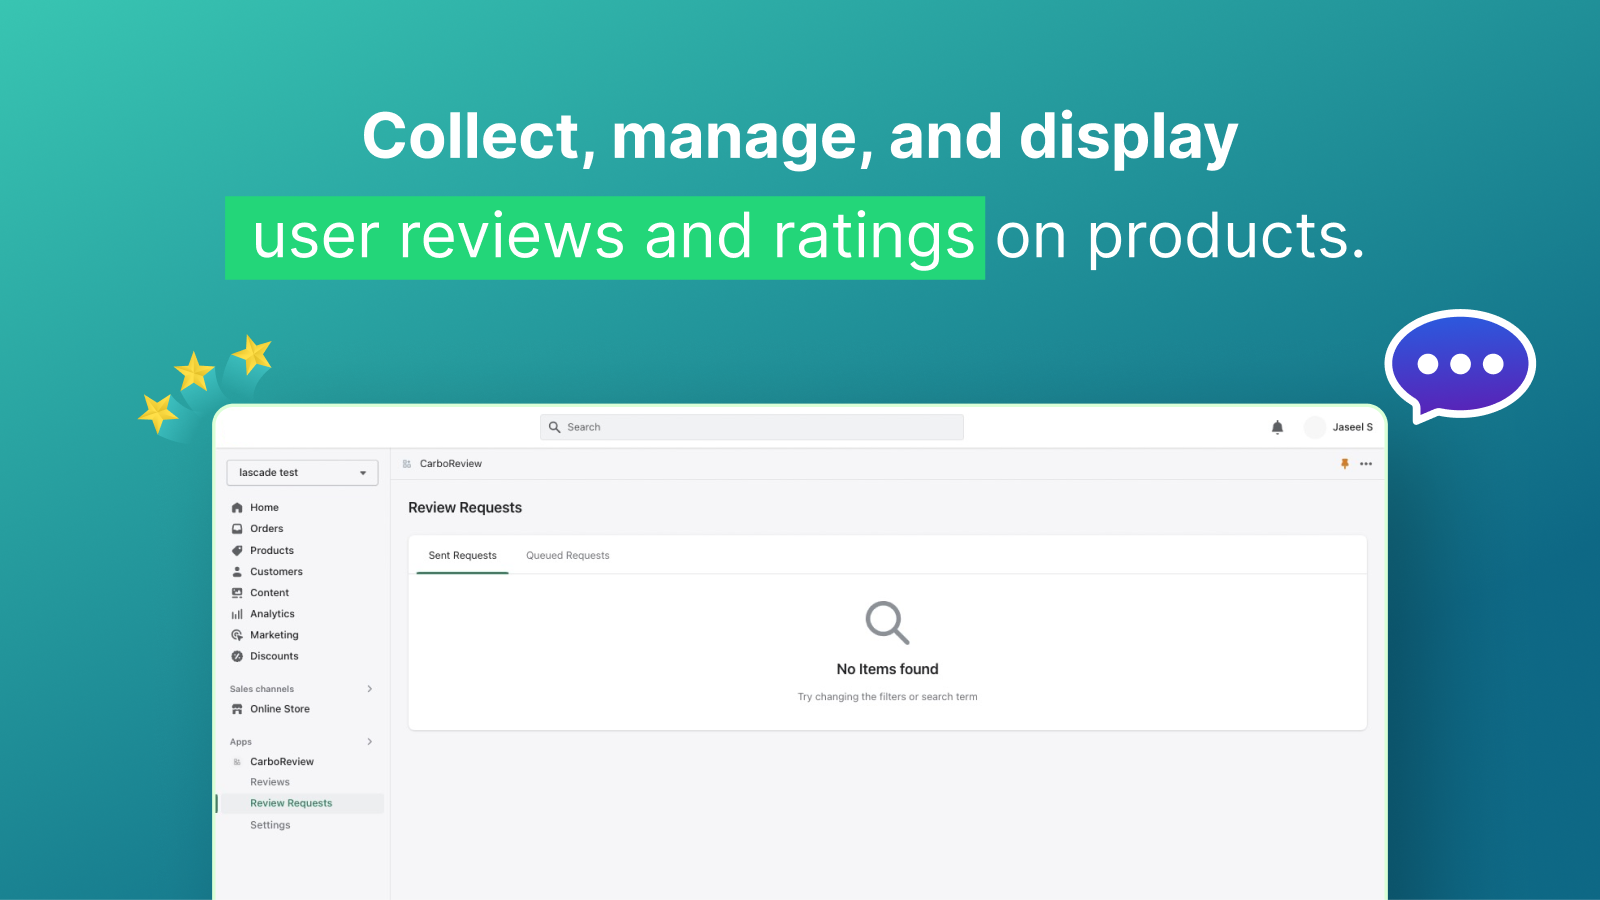 Collect and display user reviews and ratings on products